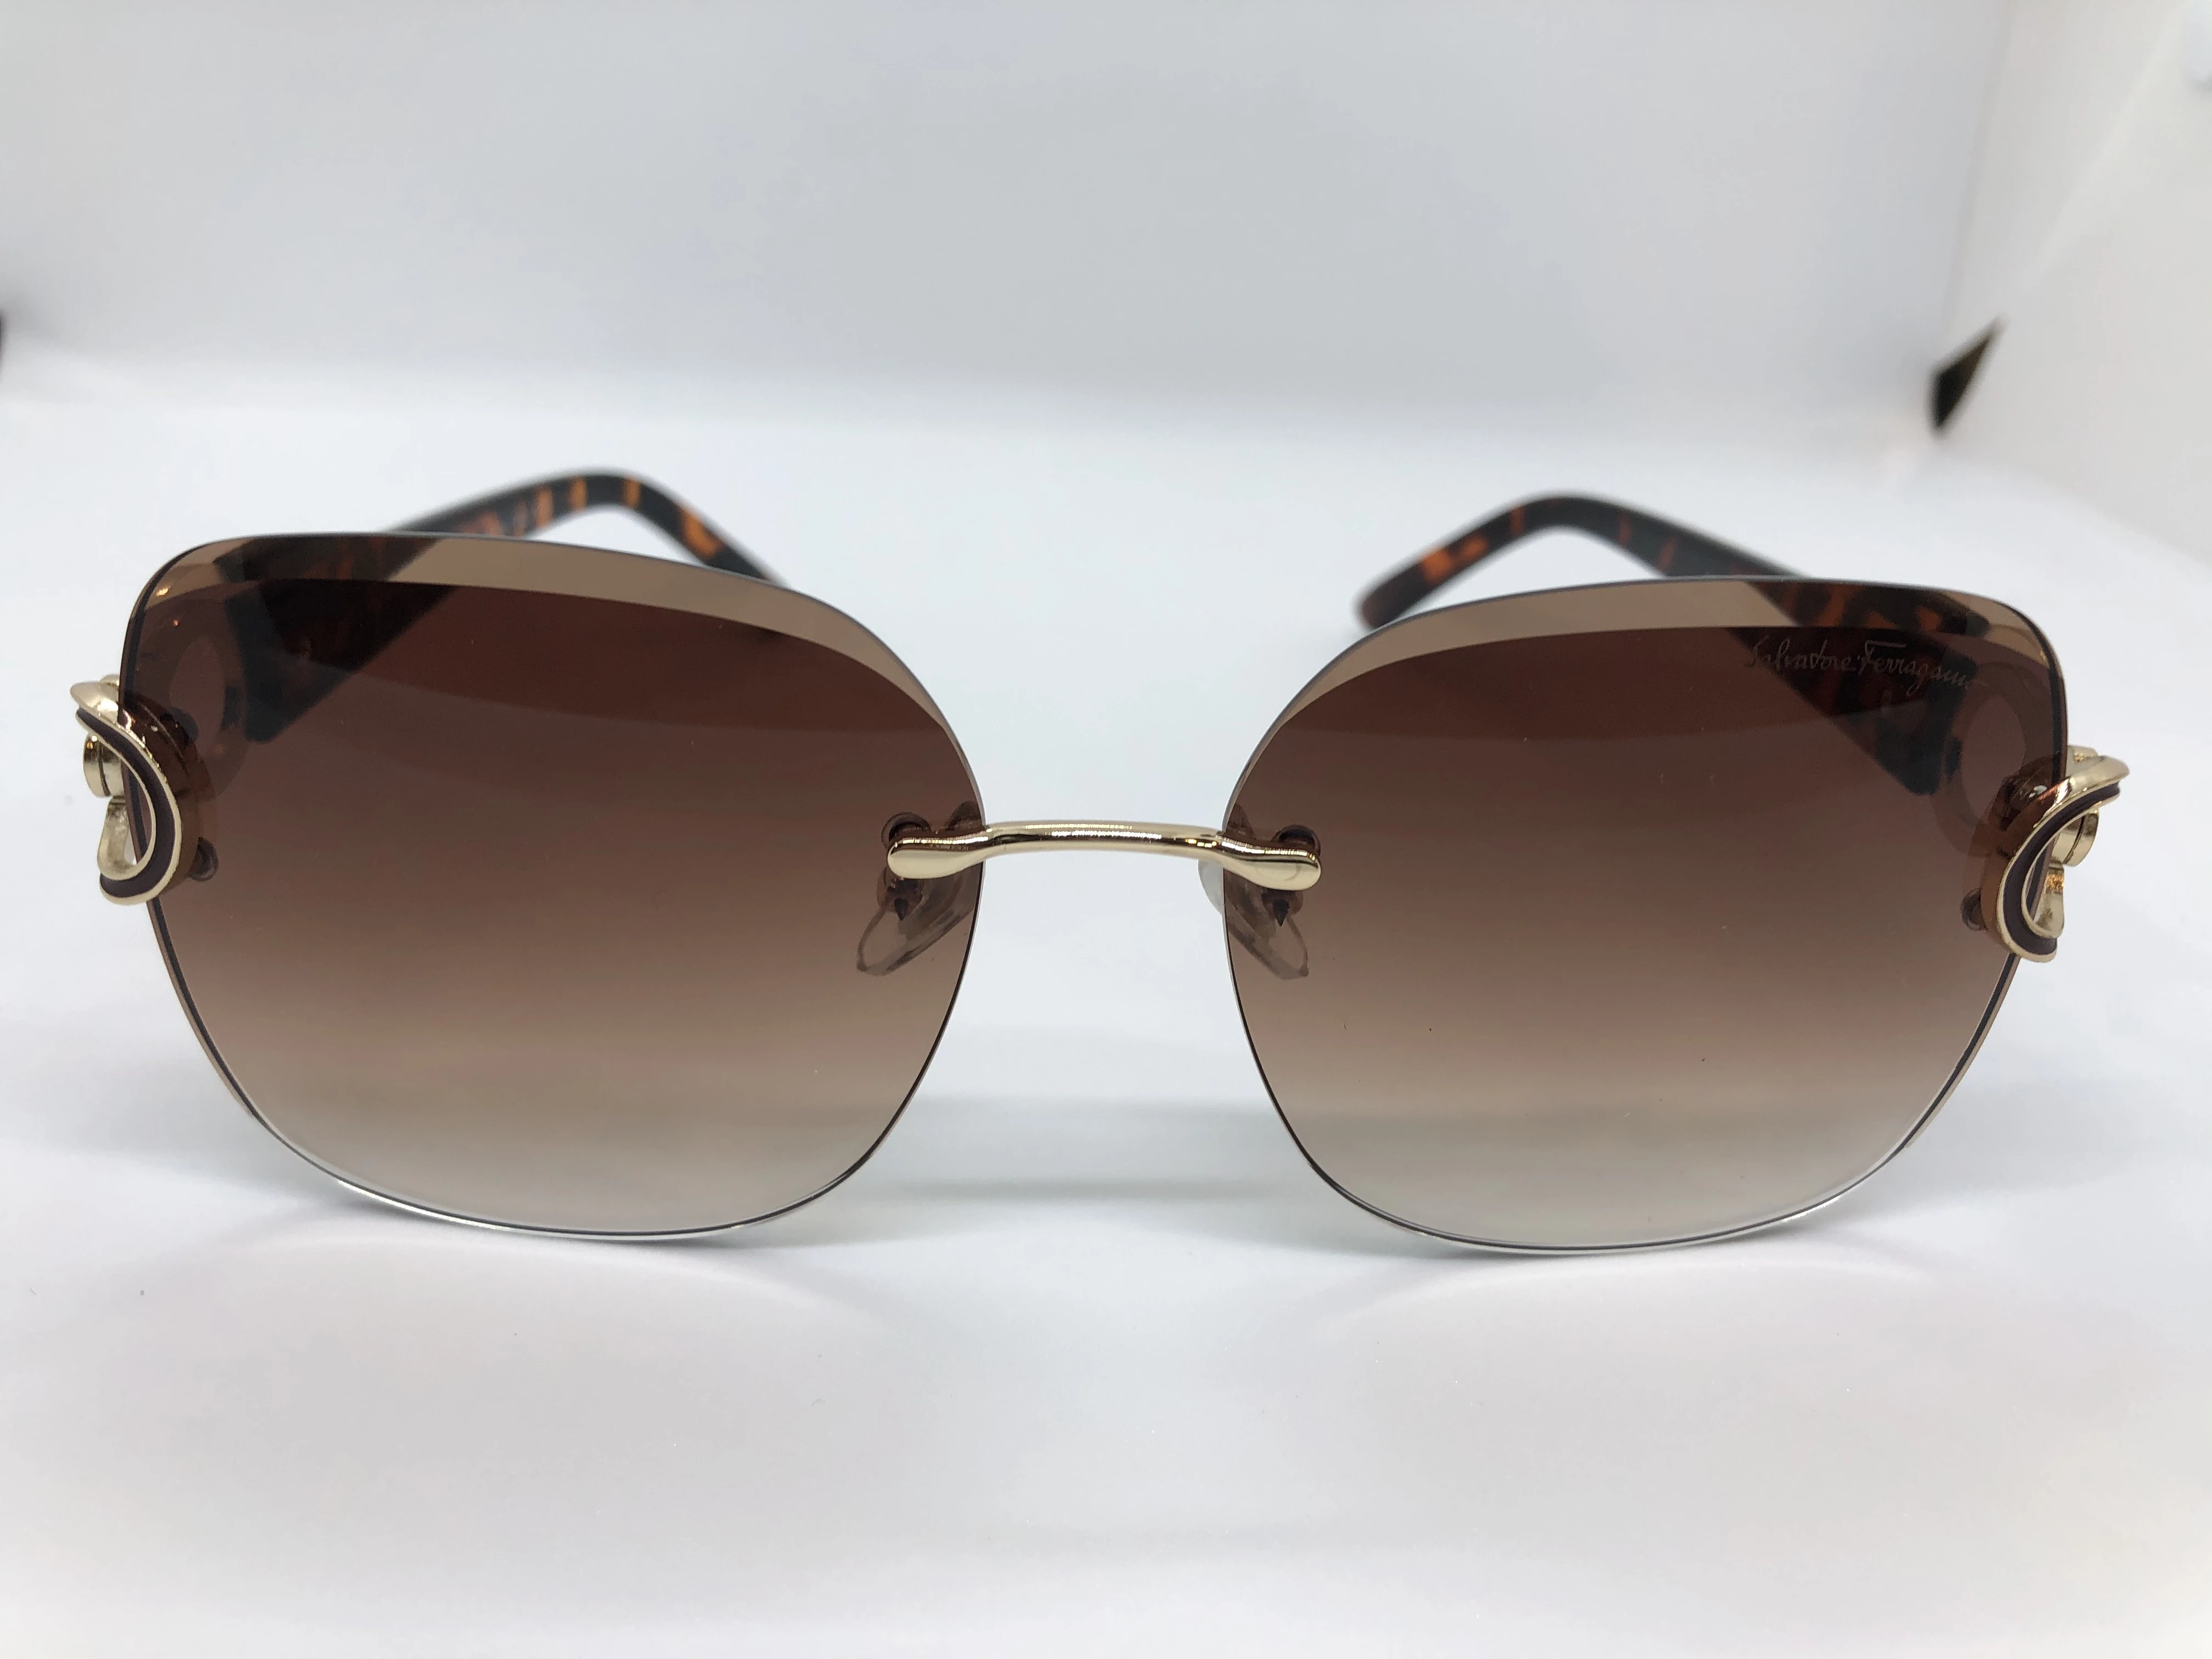 Sunglasses - from Salvatore Ferragamo - without frame - light brown gradient lenses - and dark brown embossed polycarbonate armor - with a golden logo - for women